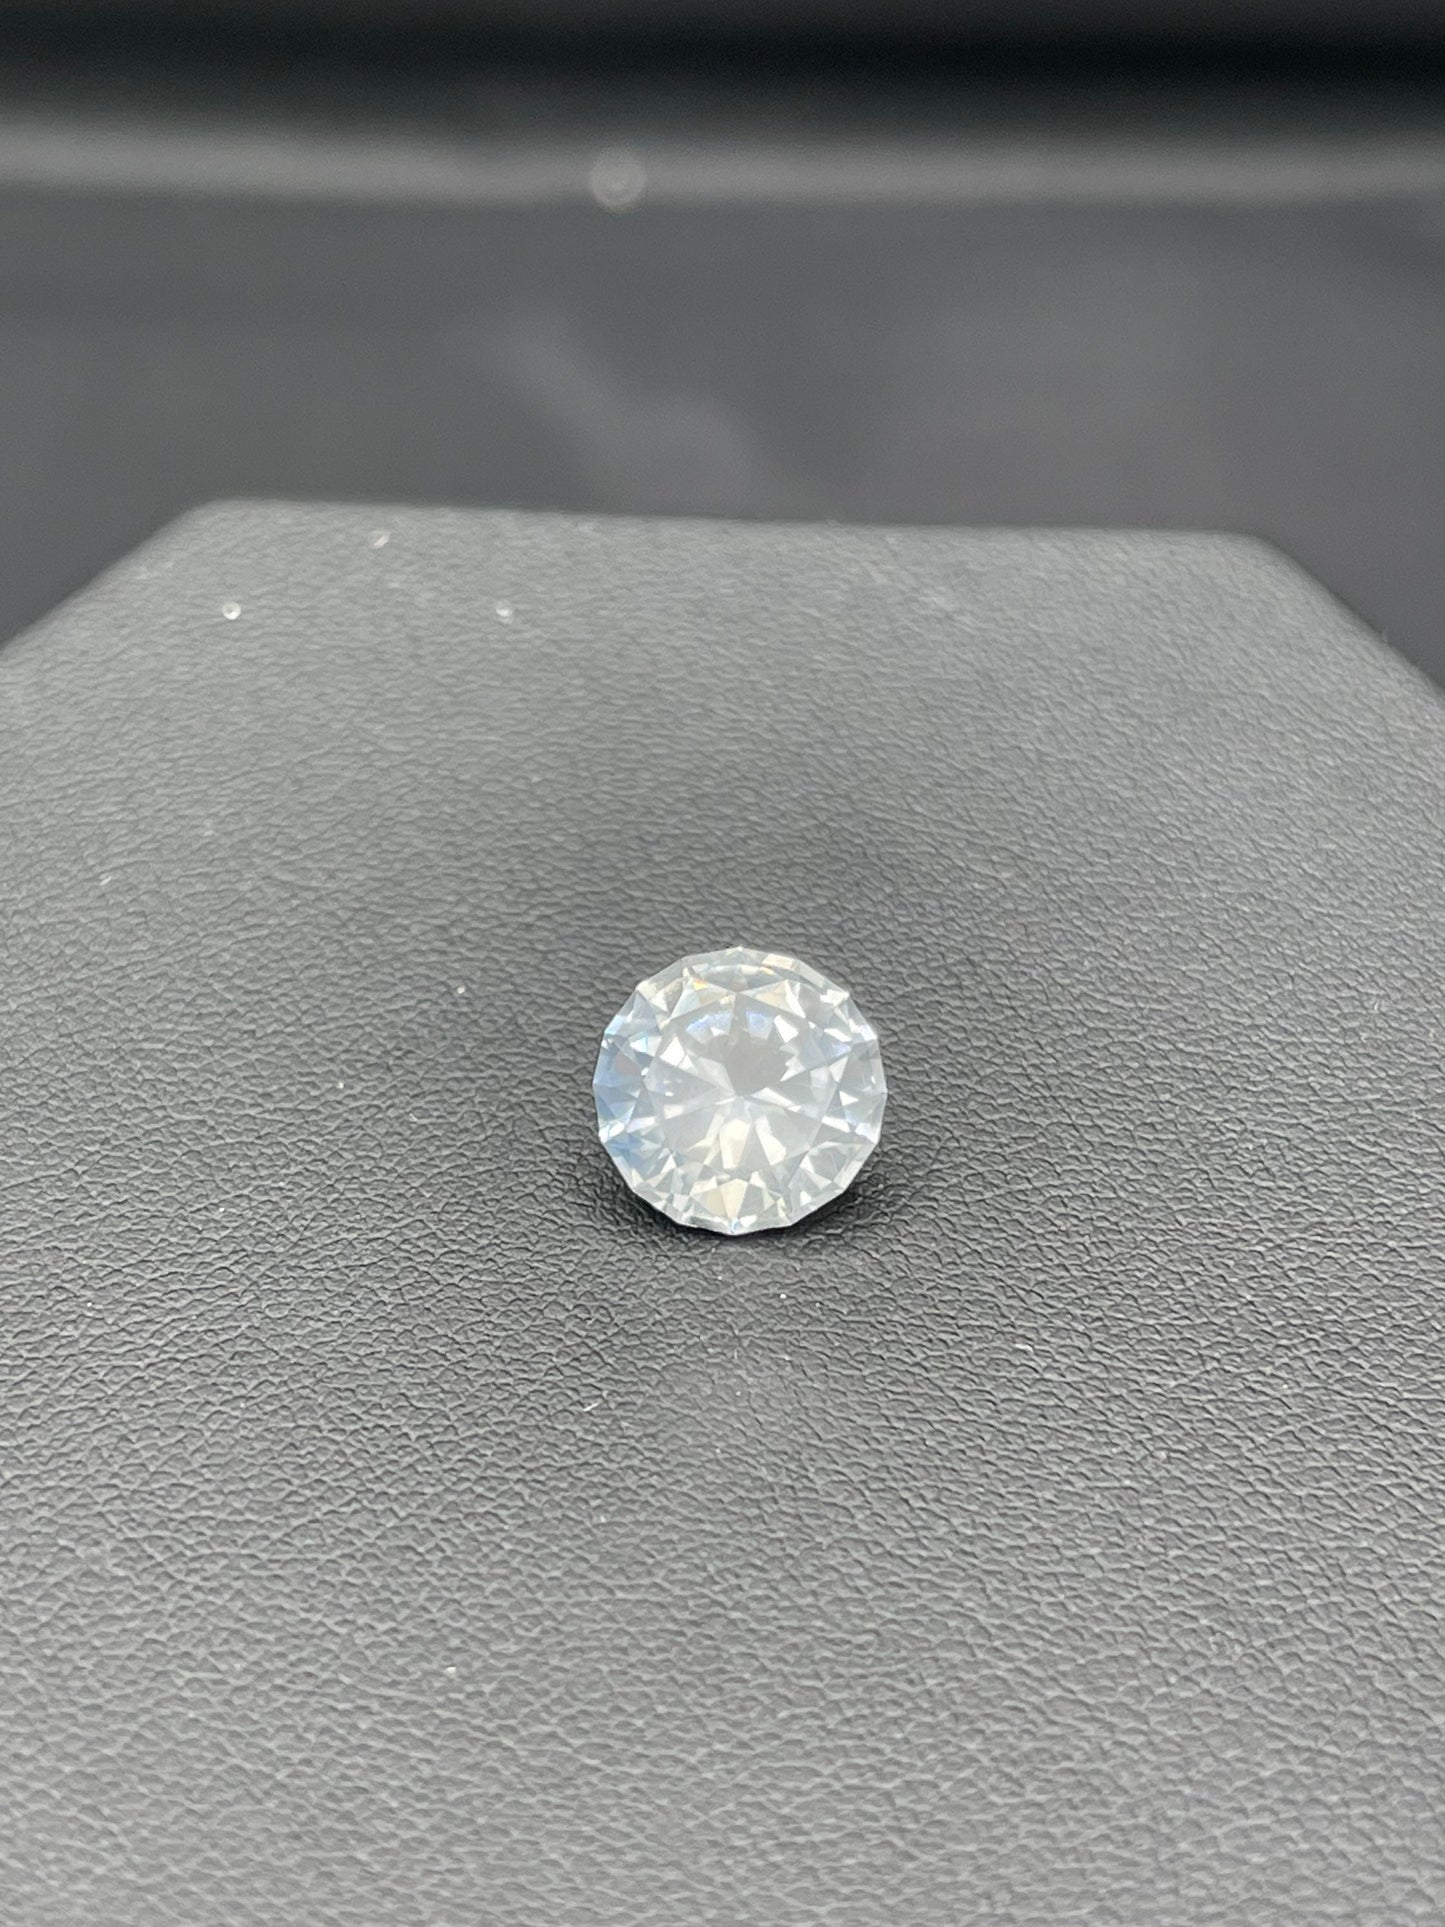 5.66 Natural GIA Certified Round Brilliant White (Very Light Blue) Sapphire